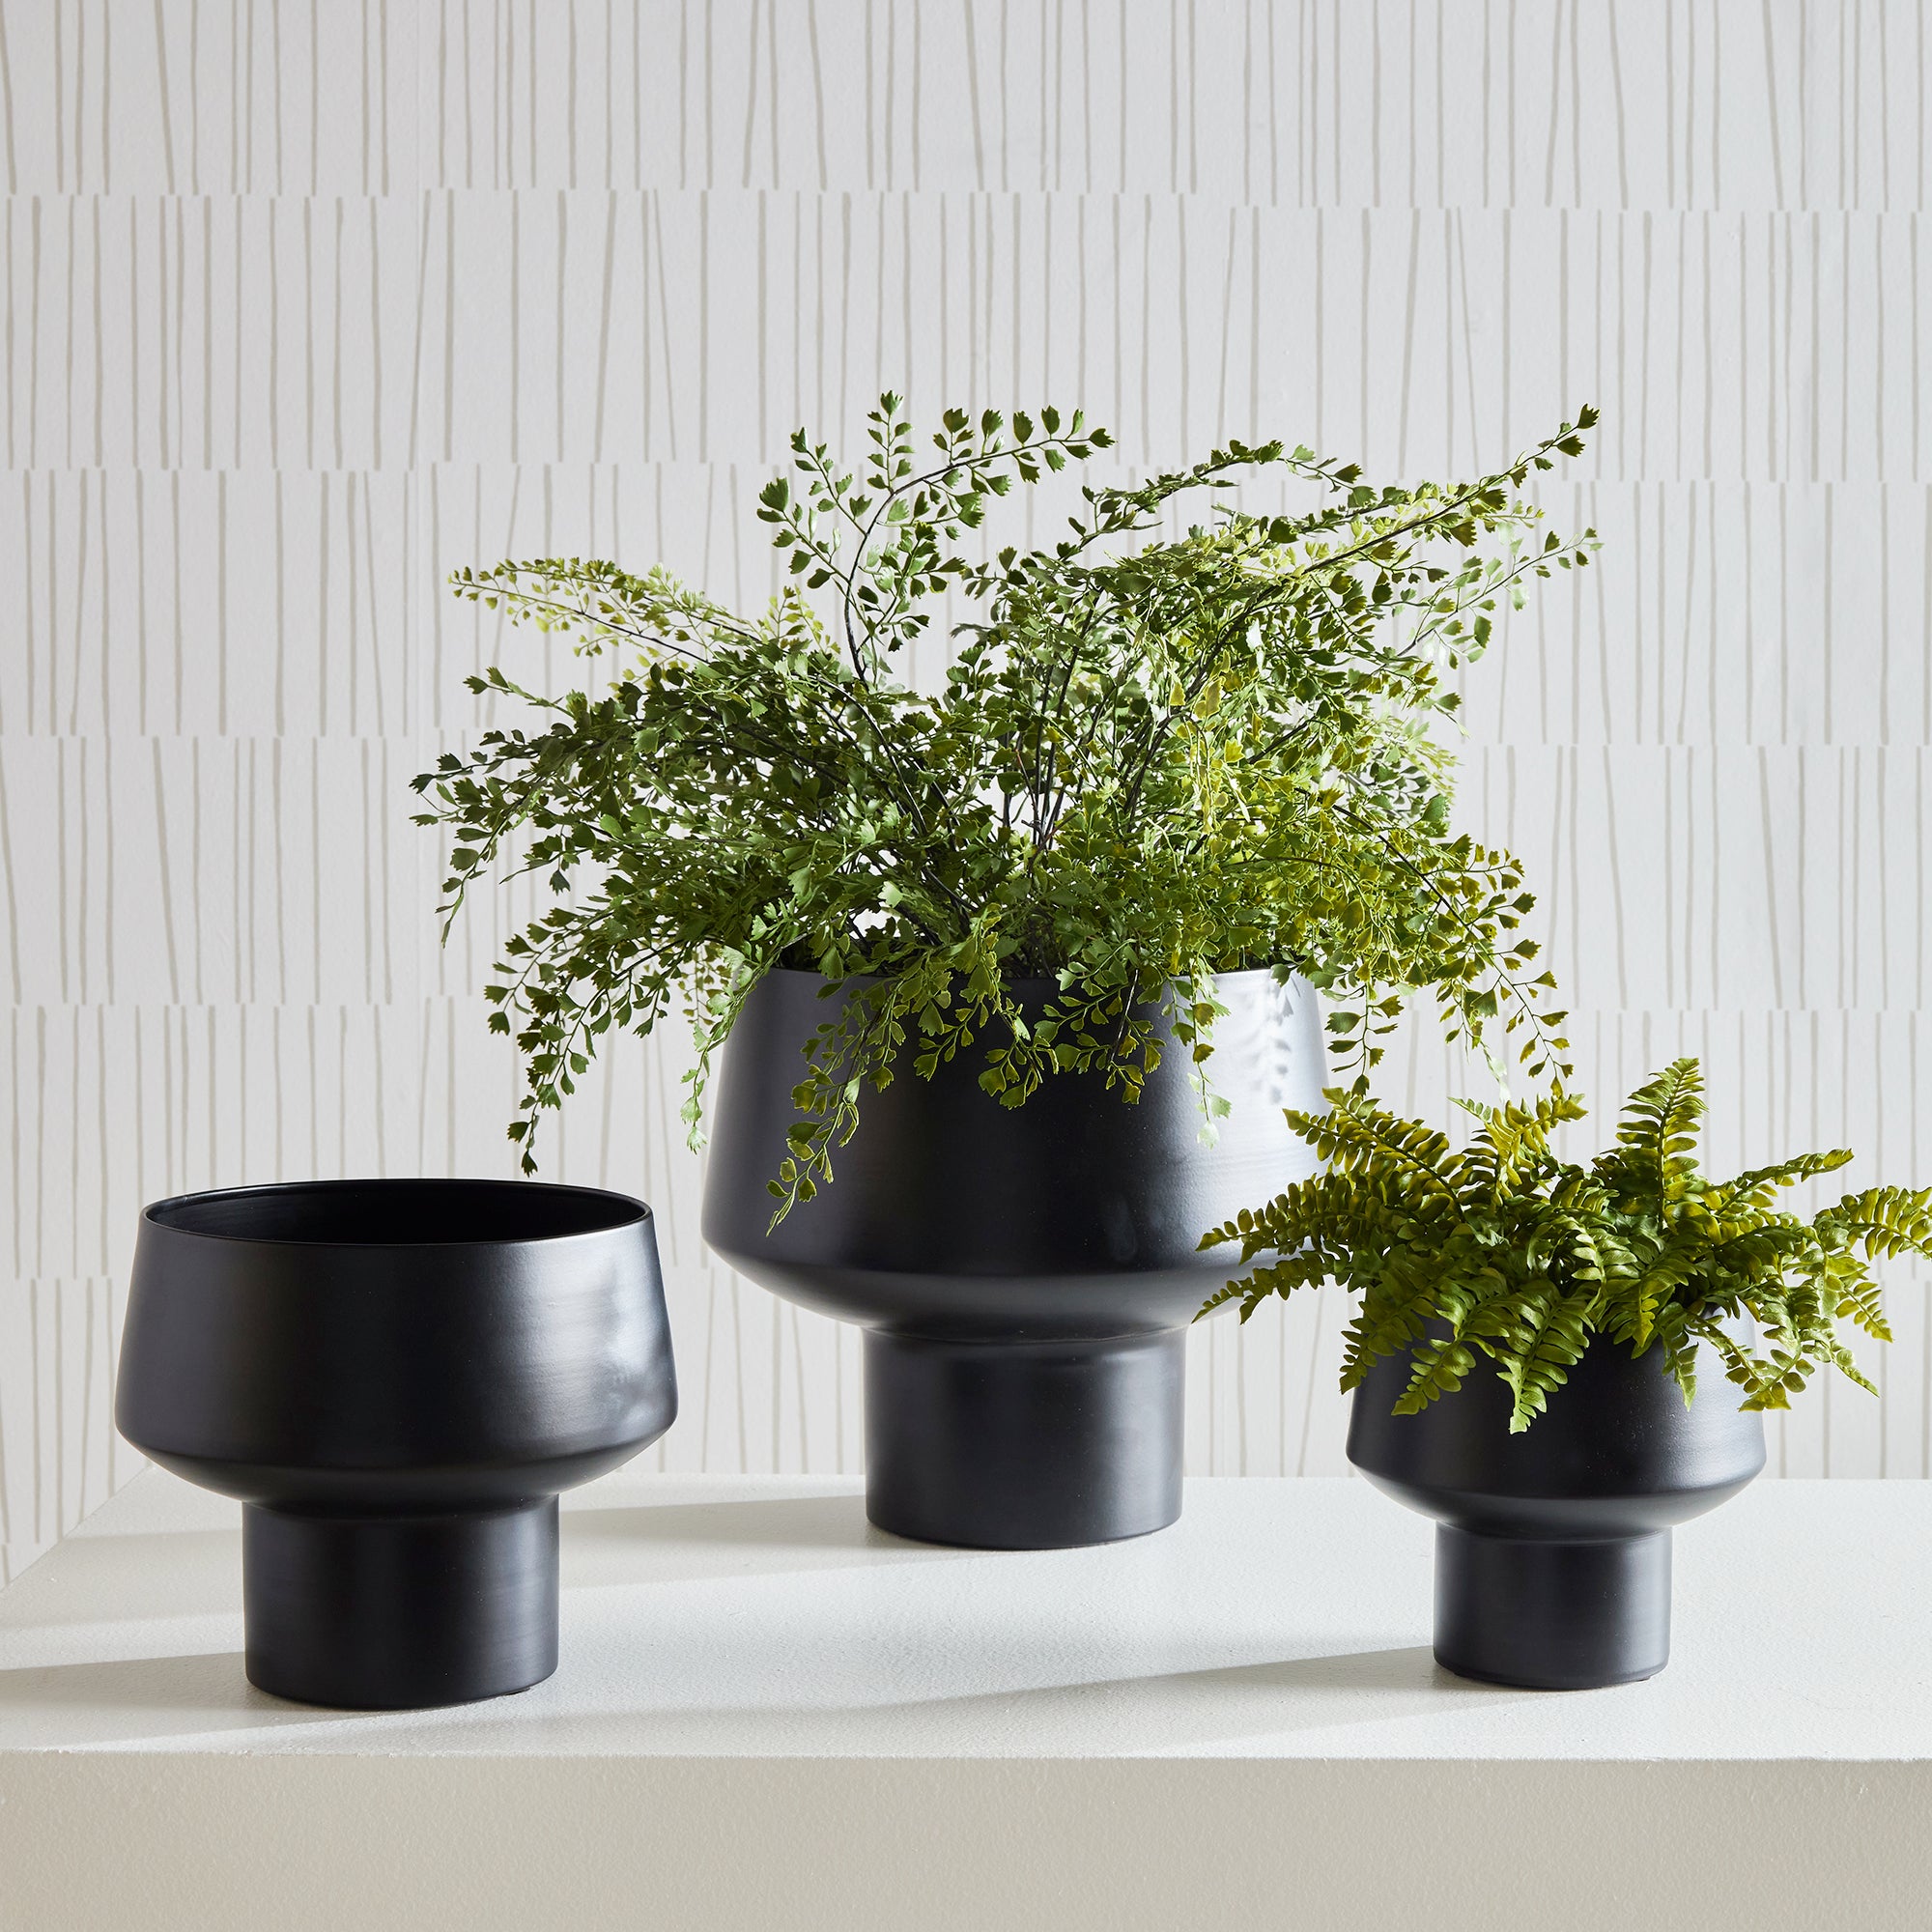 You'd never guess this set of three sleek cachepots are made of a light aluminum. Finished in a matte black, they are a contemporary set for your favorite faux ferns or floral drop-ins. Amethyst Home provides interior design, new construction, custom furniture, and area rugs in the Winter Garden metro area.